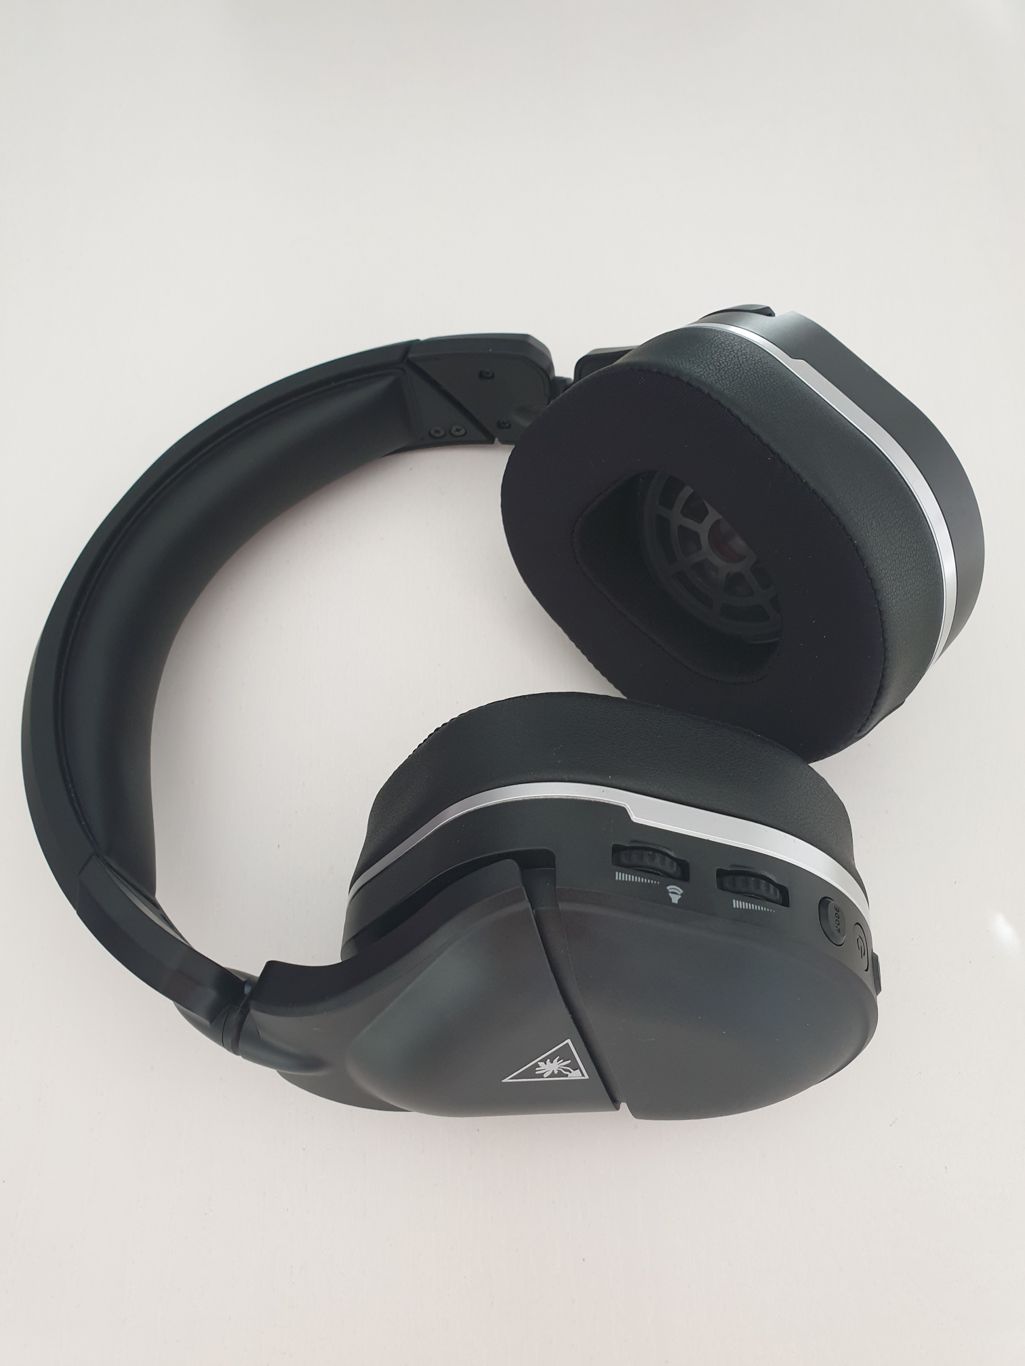 TEST] Casque gaming Turtle Beach Stealth 700 pour PS4